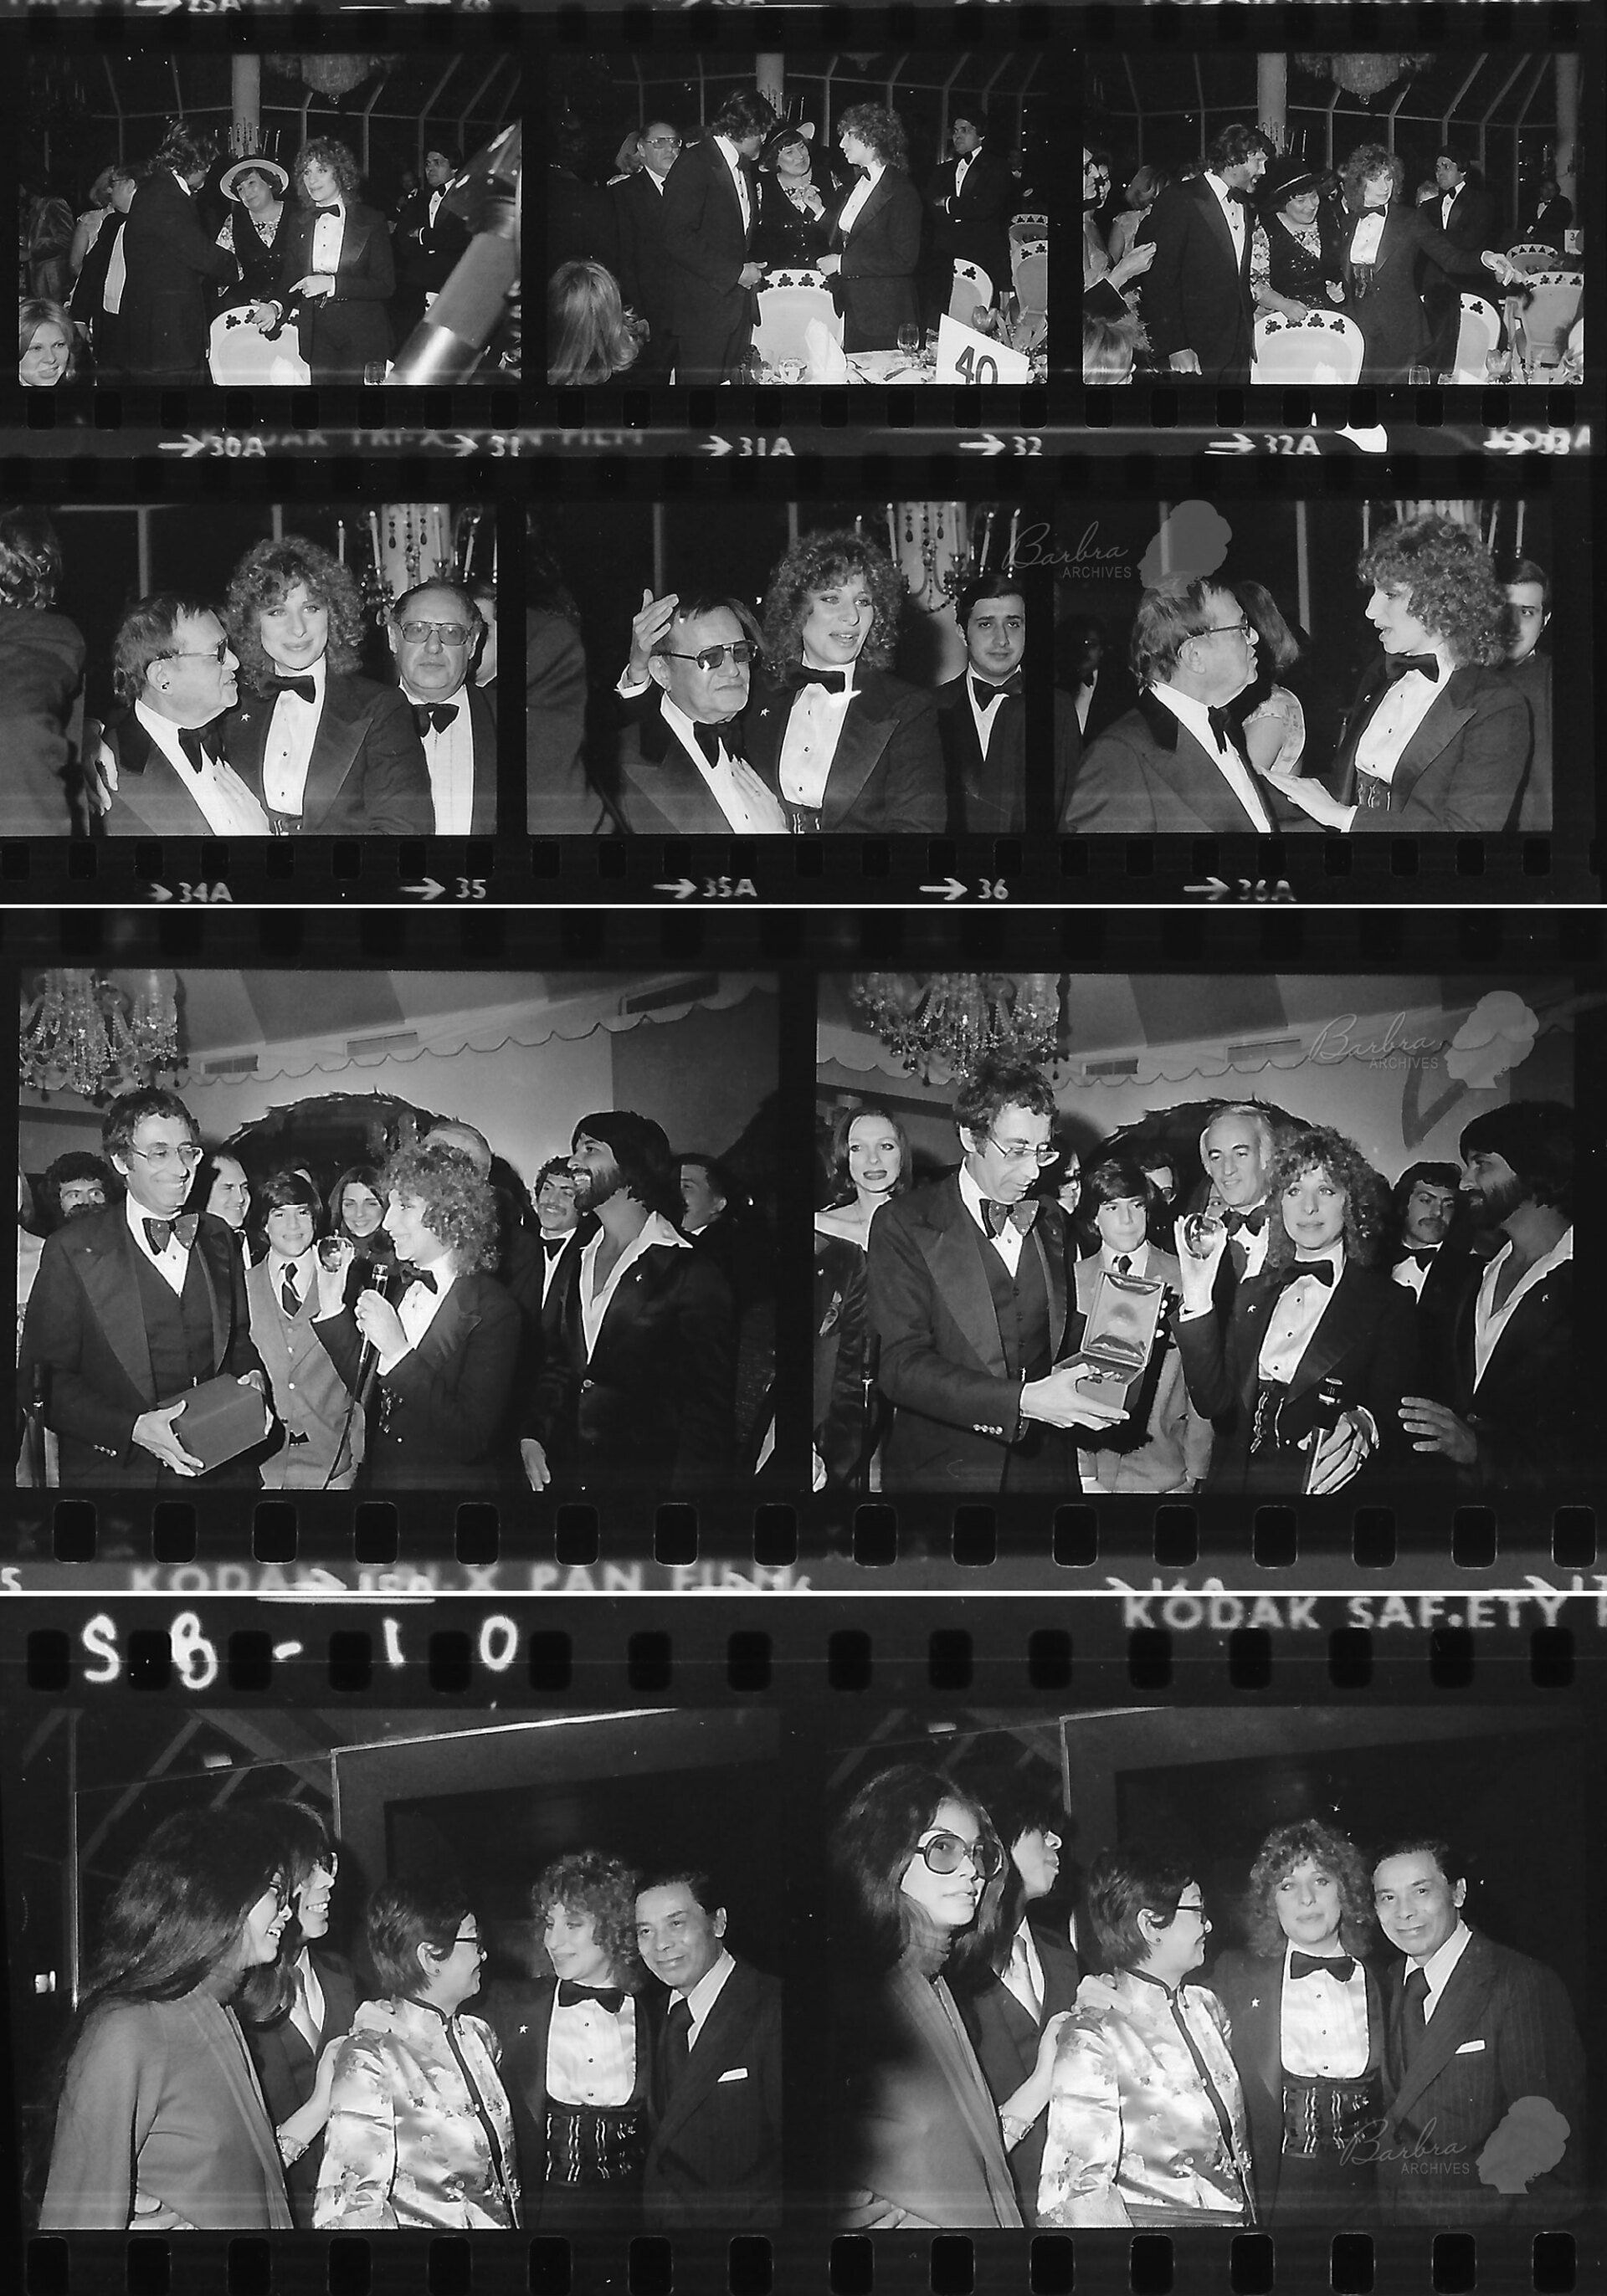 Proof sheet photos from the New York premiere featuring Bella Abzug, Jule Styne, and the Choys.